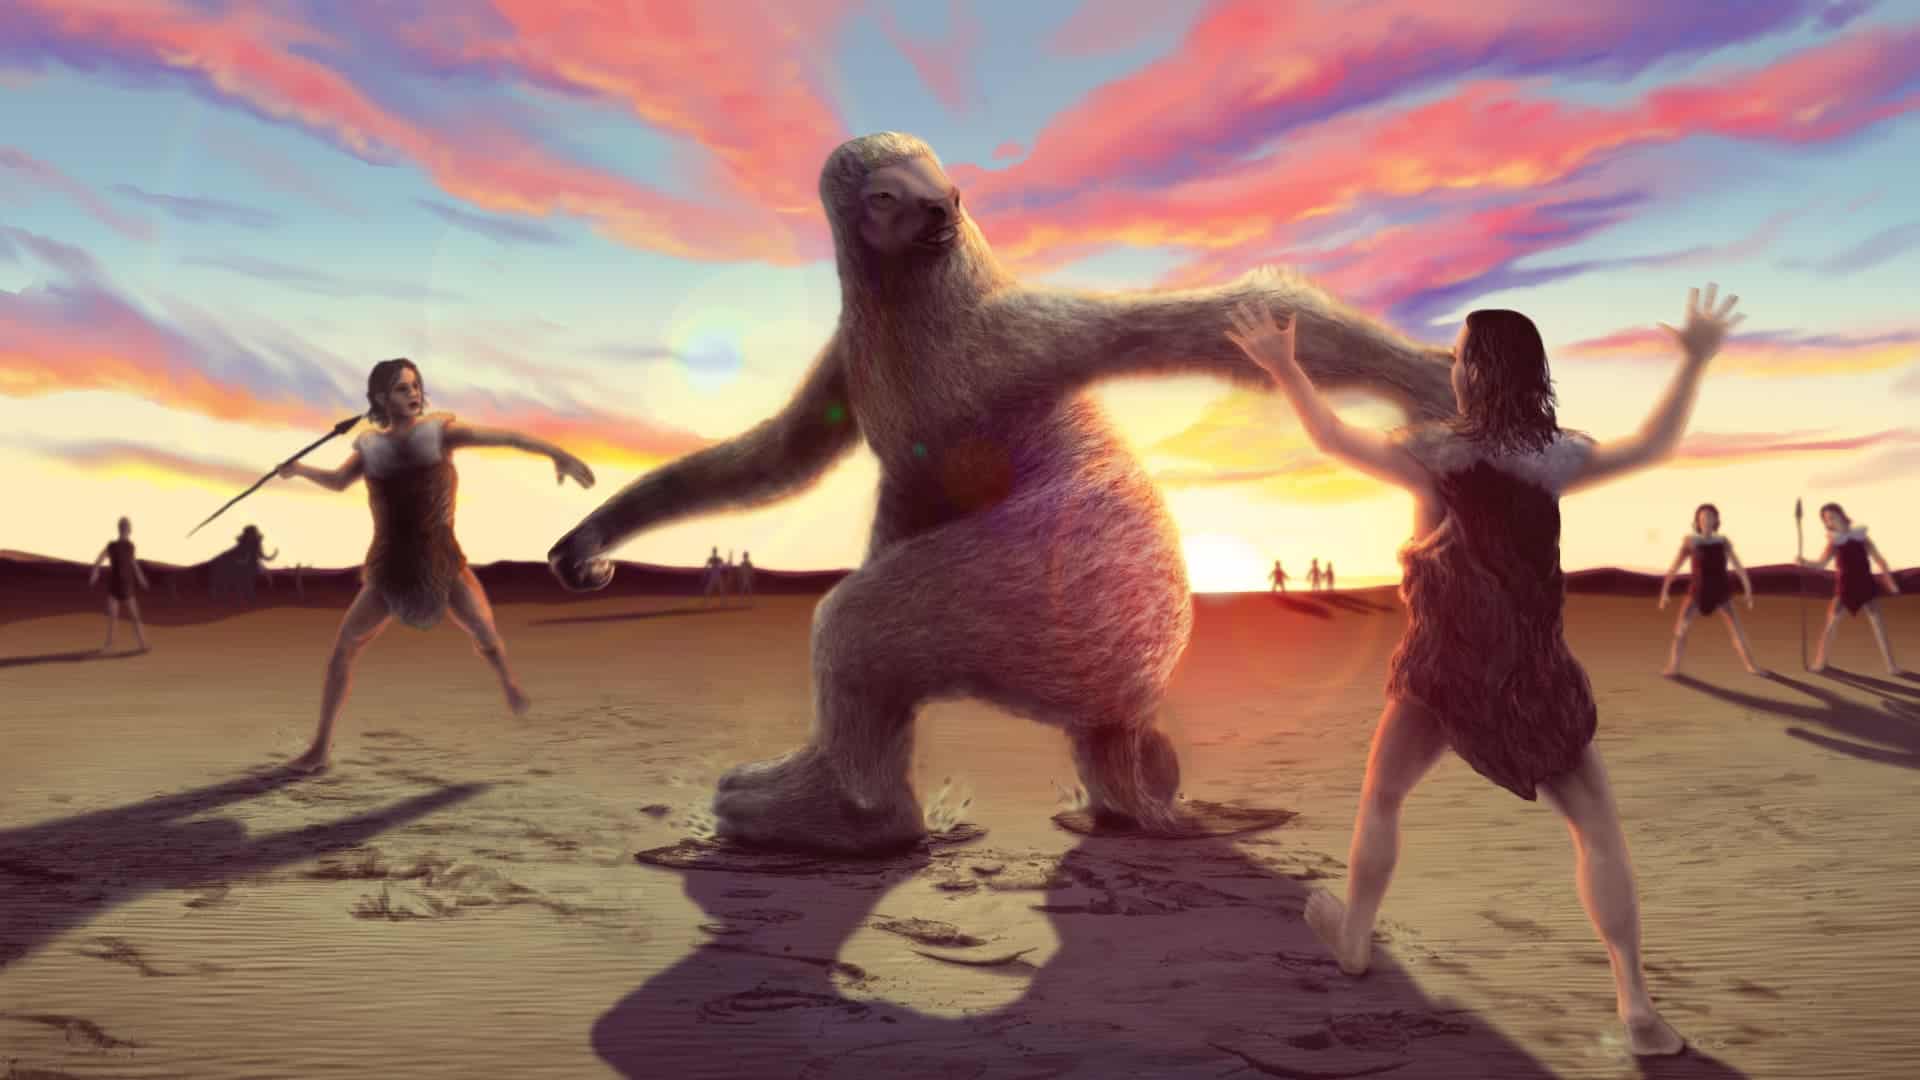 An artist's illustration of an ancient encounter between human hunters and a giant ground sloth. Credit: Alex McClelland/Bournemouth University.